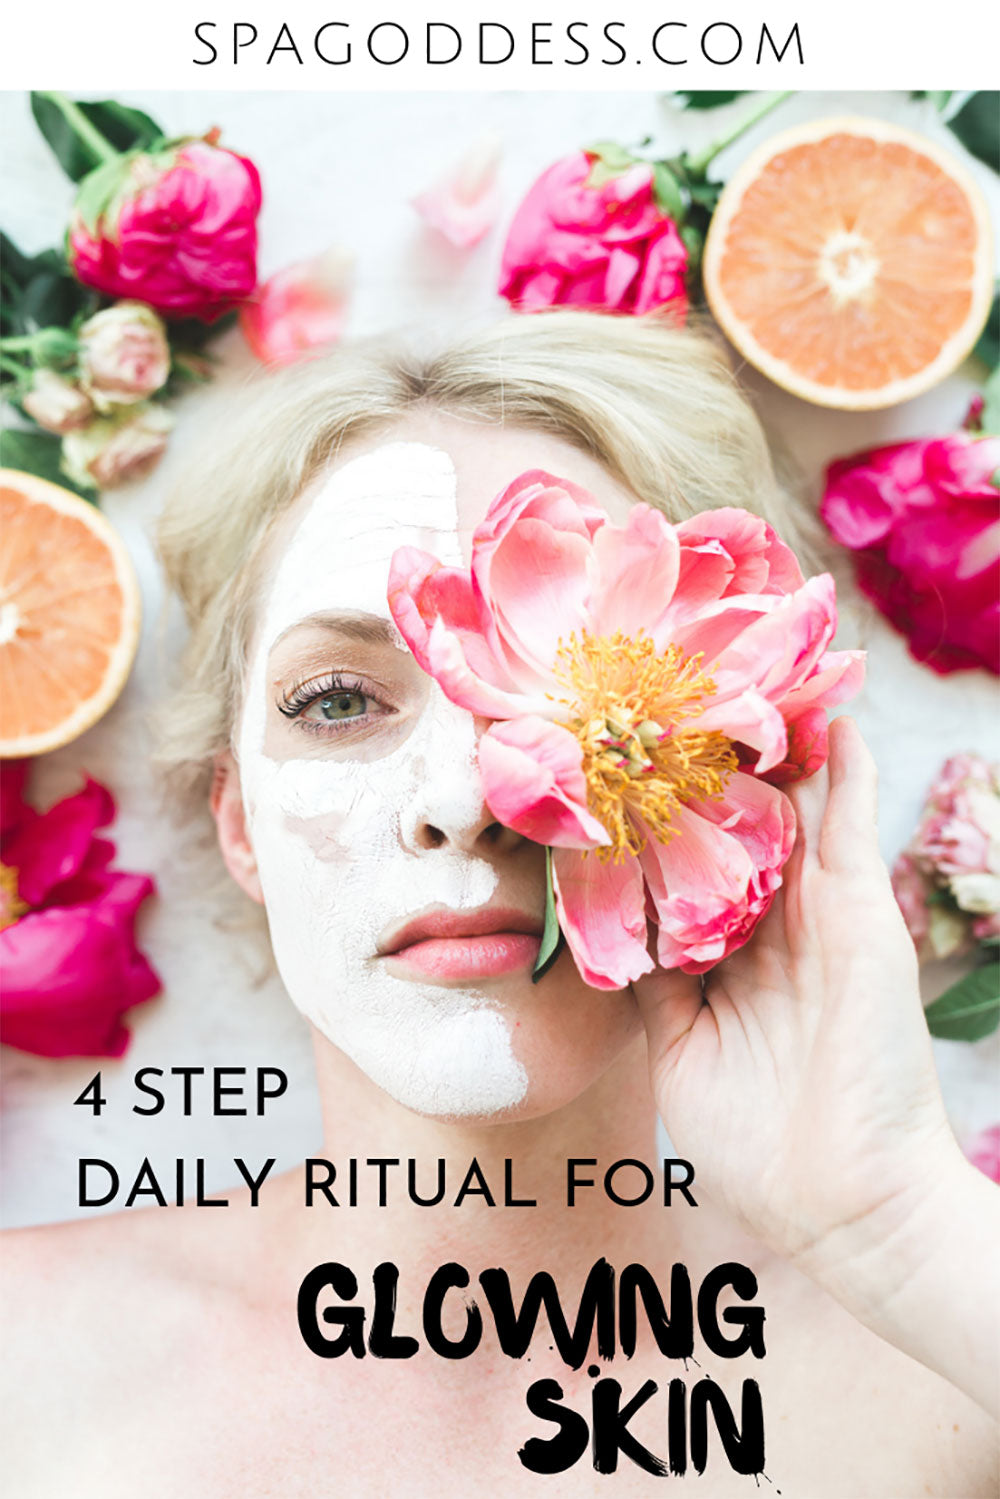 4 Natural Skin Care Steps To Follow For Glowing Skin | Organic Skincare + Natural Skincare Tips -  Click through to learn the natural skin care routine you need for glowing skin by SpaGoddess Apothecary | natural beauty tips | organic skin care products | herbal skin care for face + body | self care tips | organic natural beauty products | organic natural beauty brand | all natural skin care routine | natural green beauty tips | how to get glowing skin #naturalskincare #greenbeauty #healthyskin